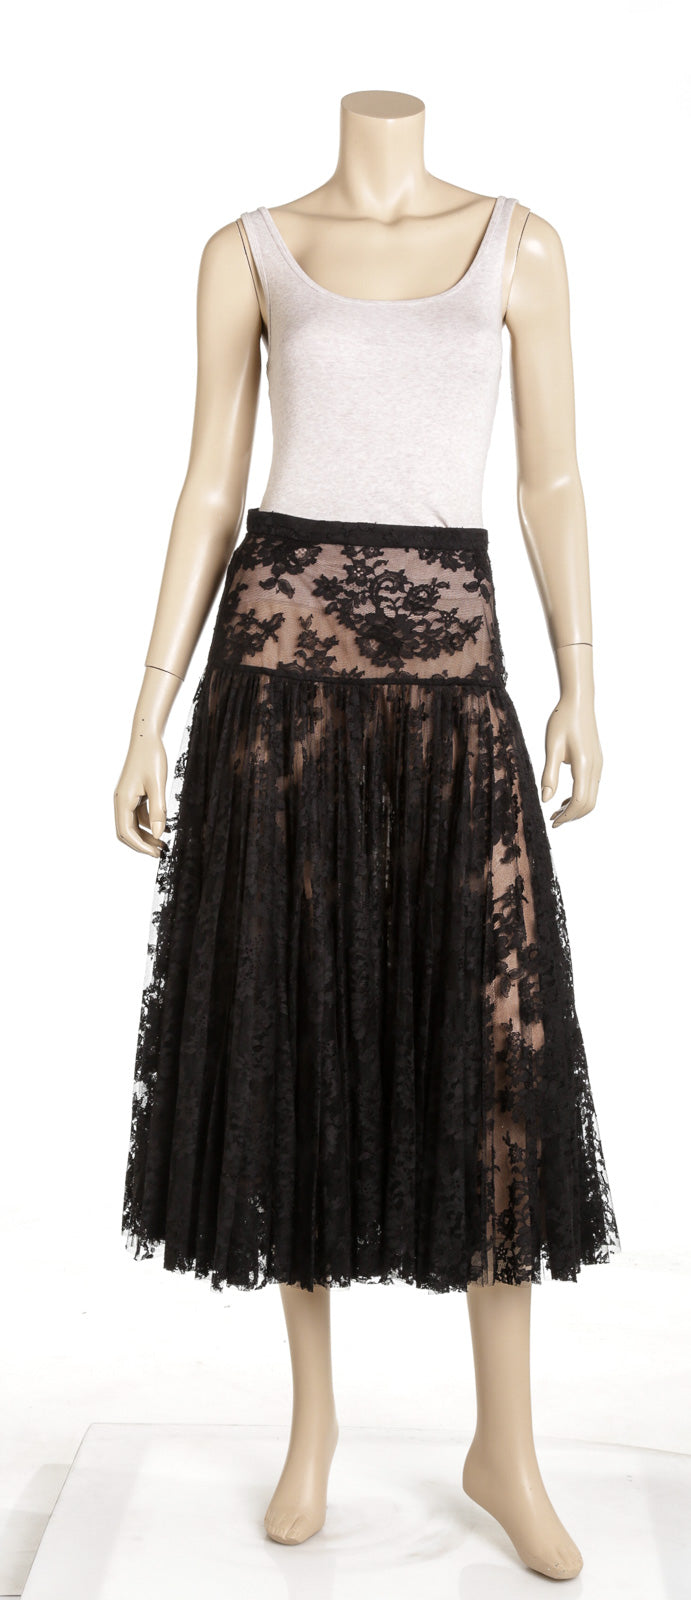 Chanel Black Lace Pleaded Maxi Skirt NEW Size 38